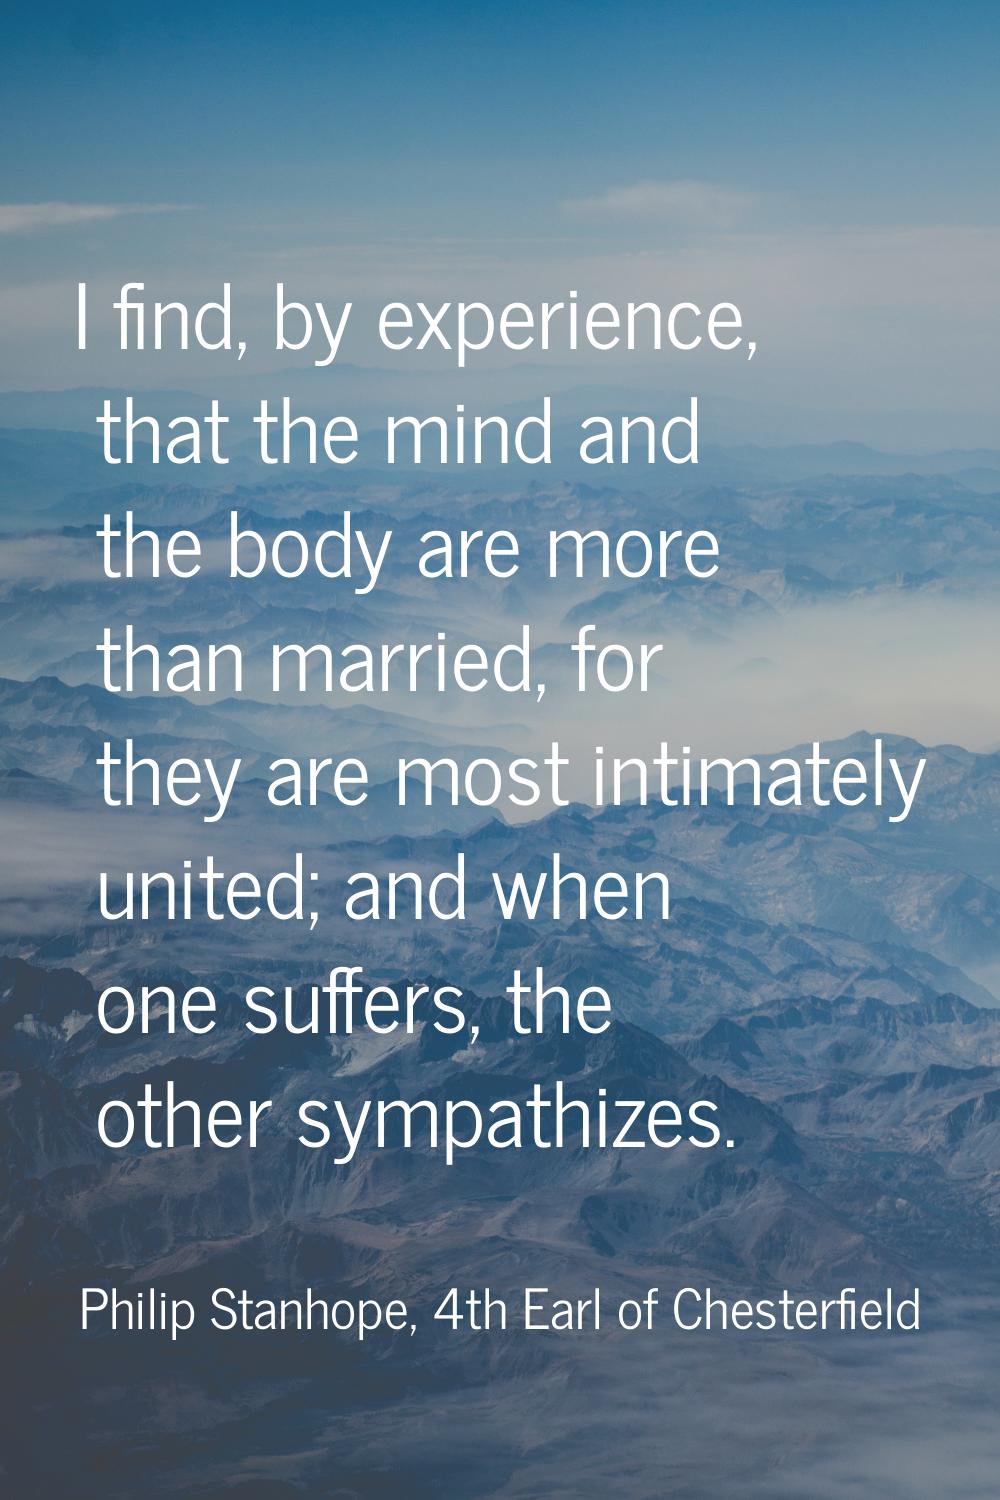 I find, by experience, that the mind and the body are more than married, for they are most intimate